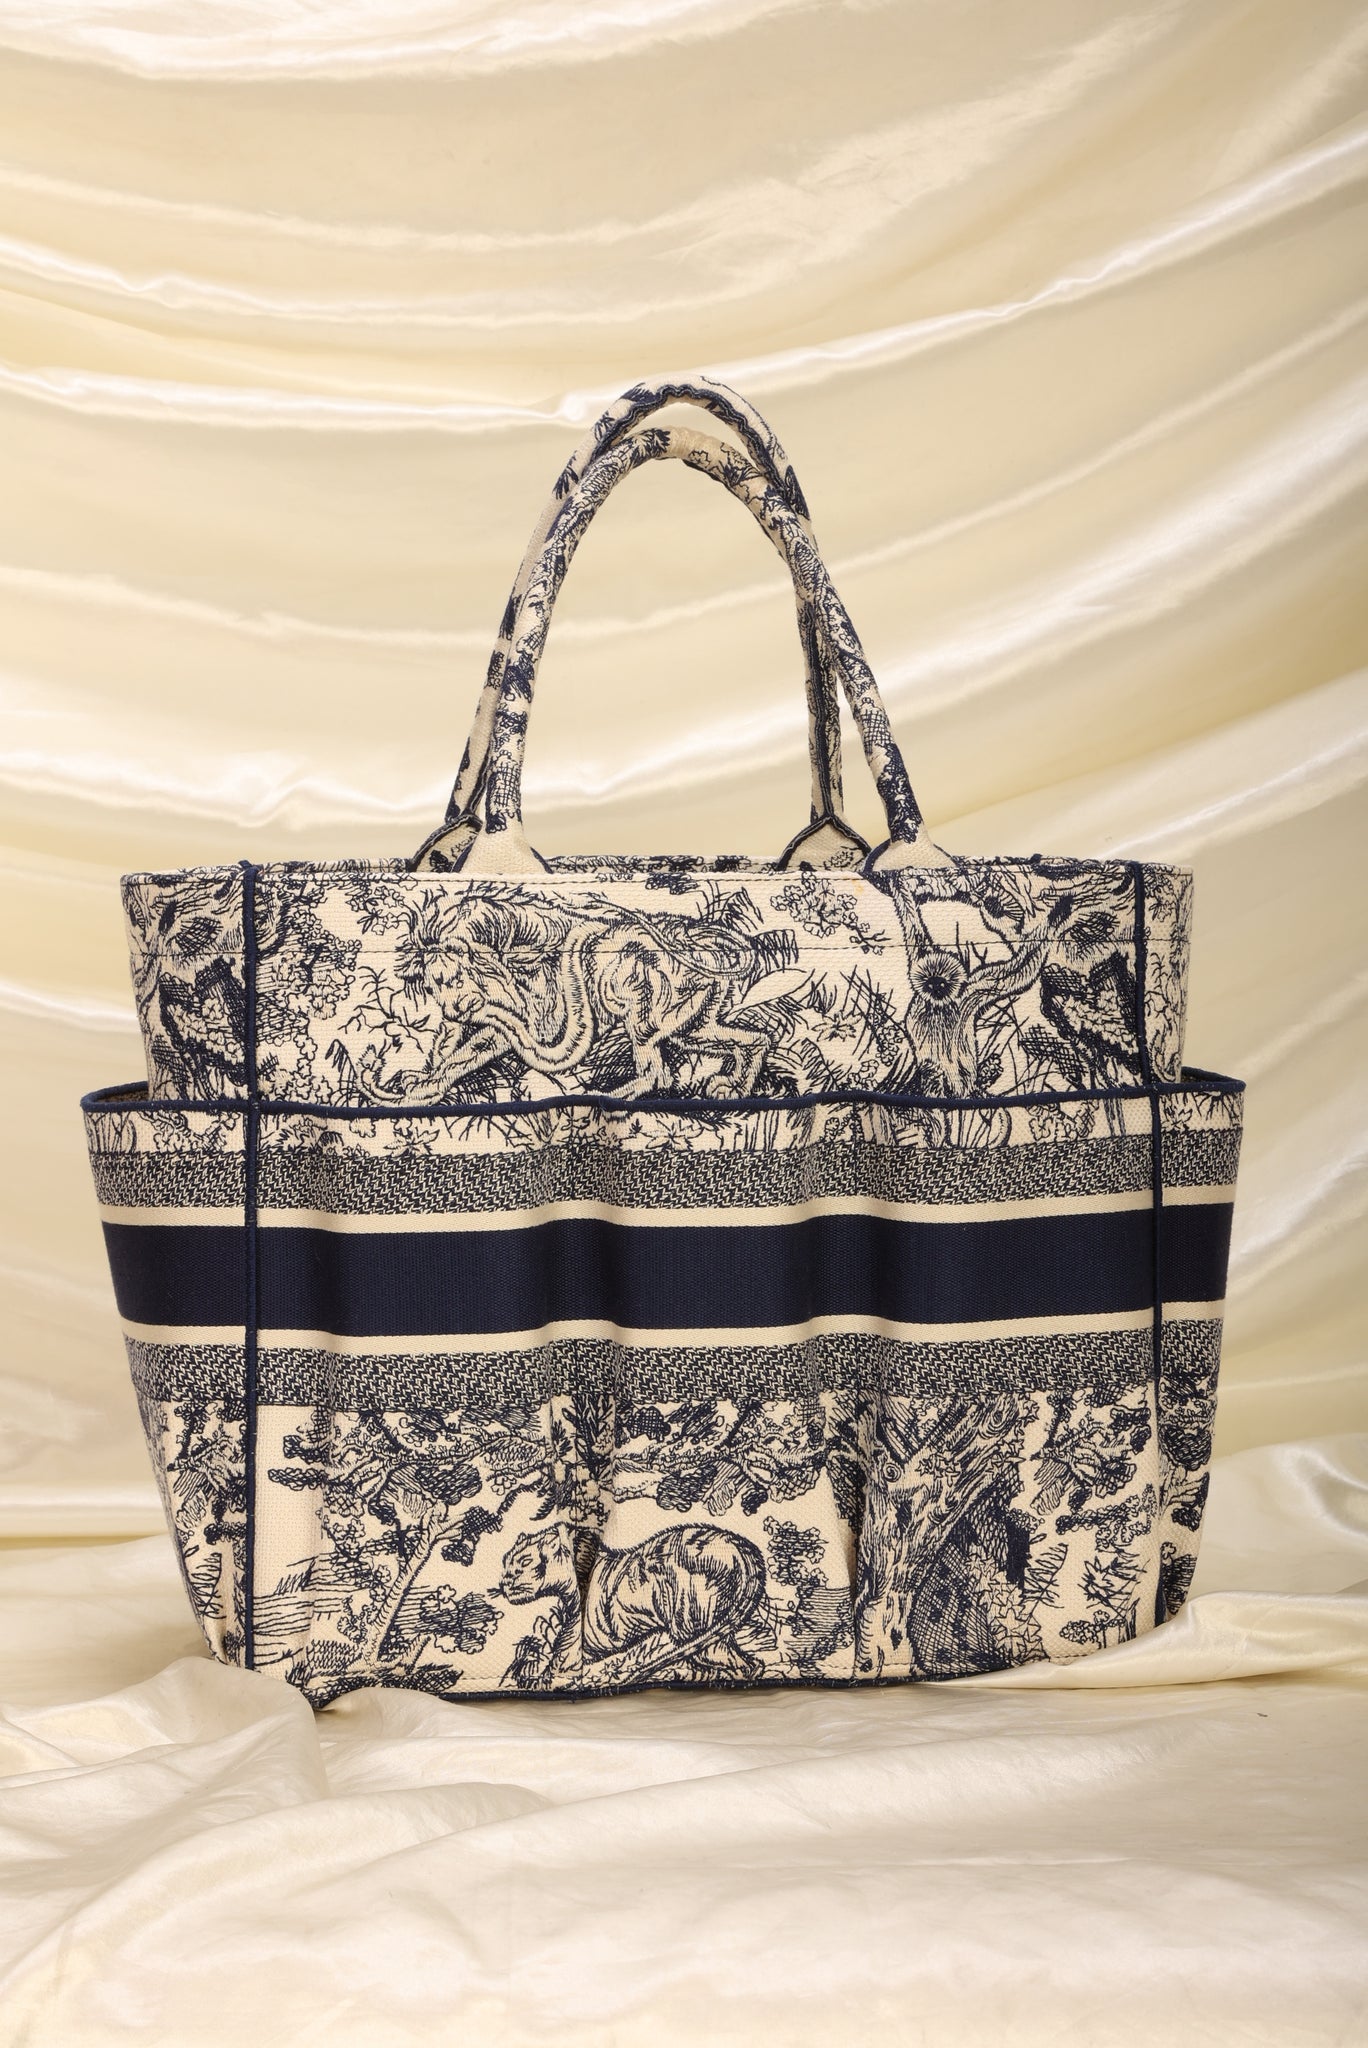 Extremely Rare Dior Catherine Toile de Jouy Tote